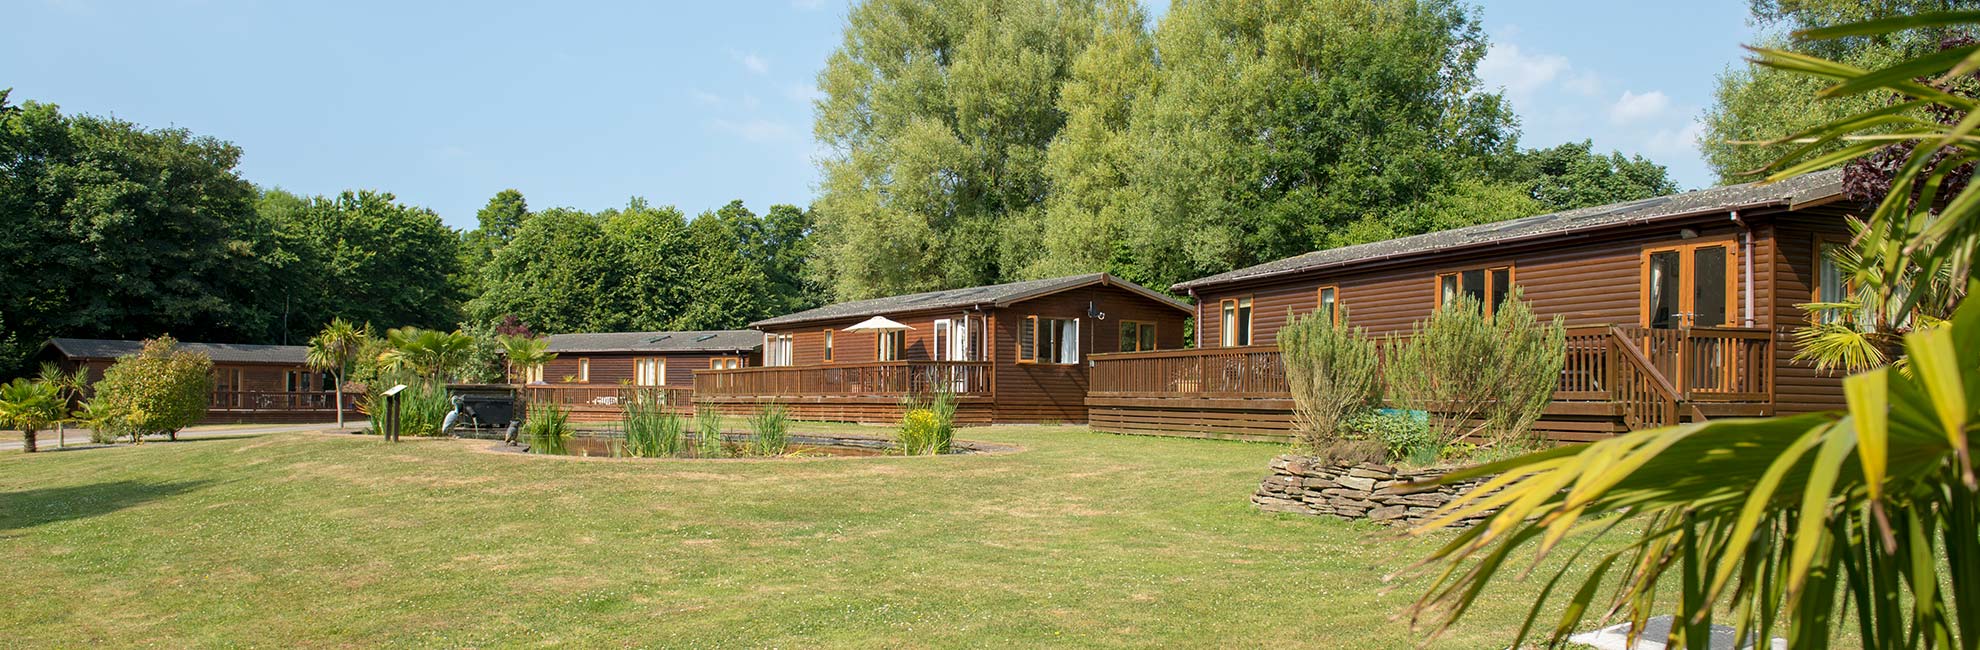 St Minver Holiday Park